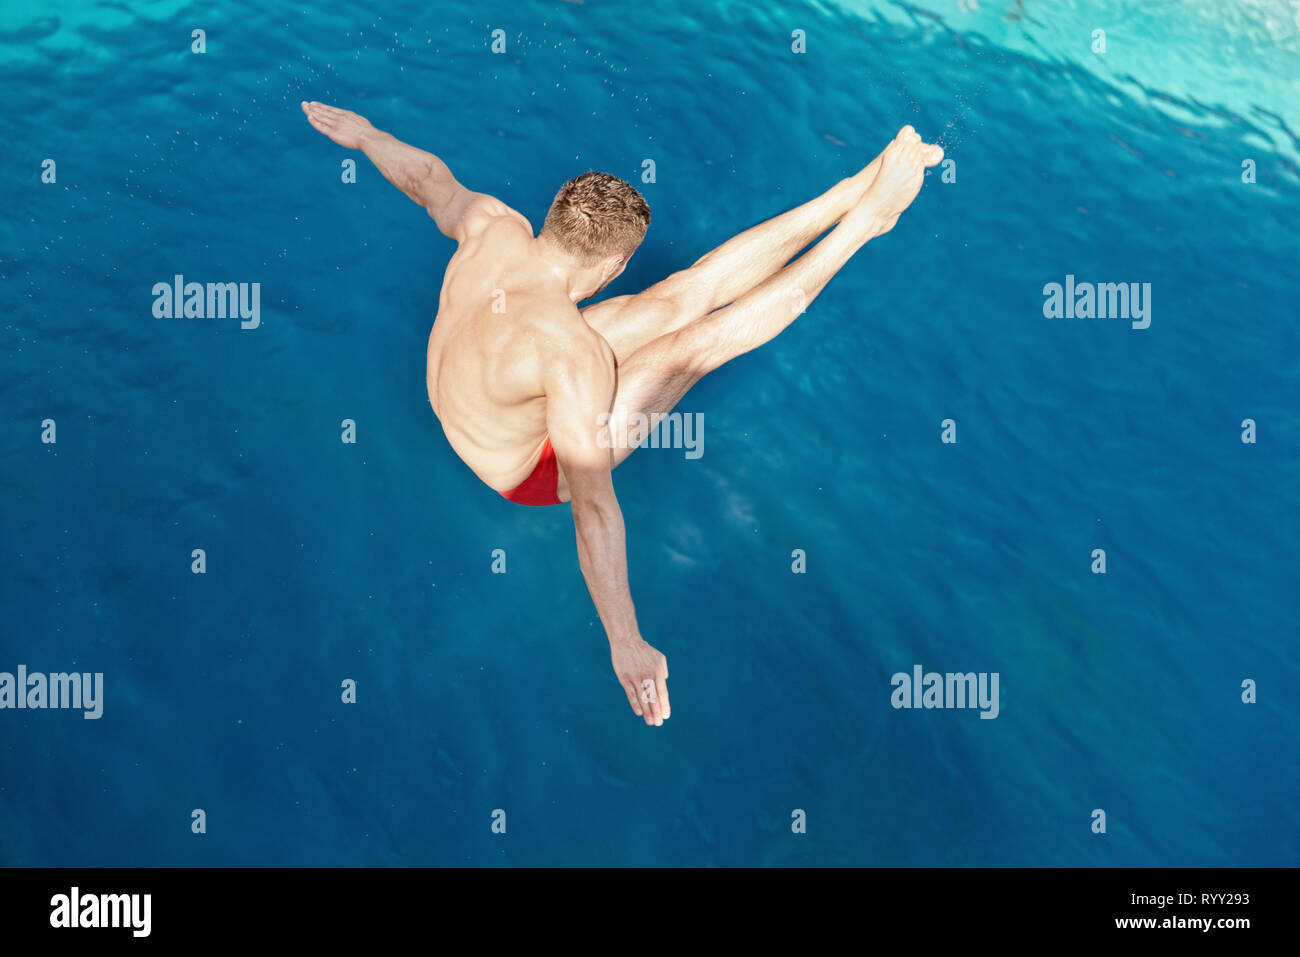 Open pike dive. Stock Photo